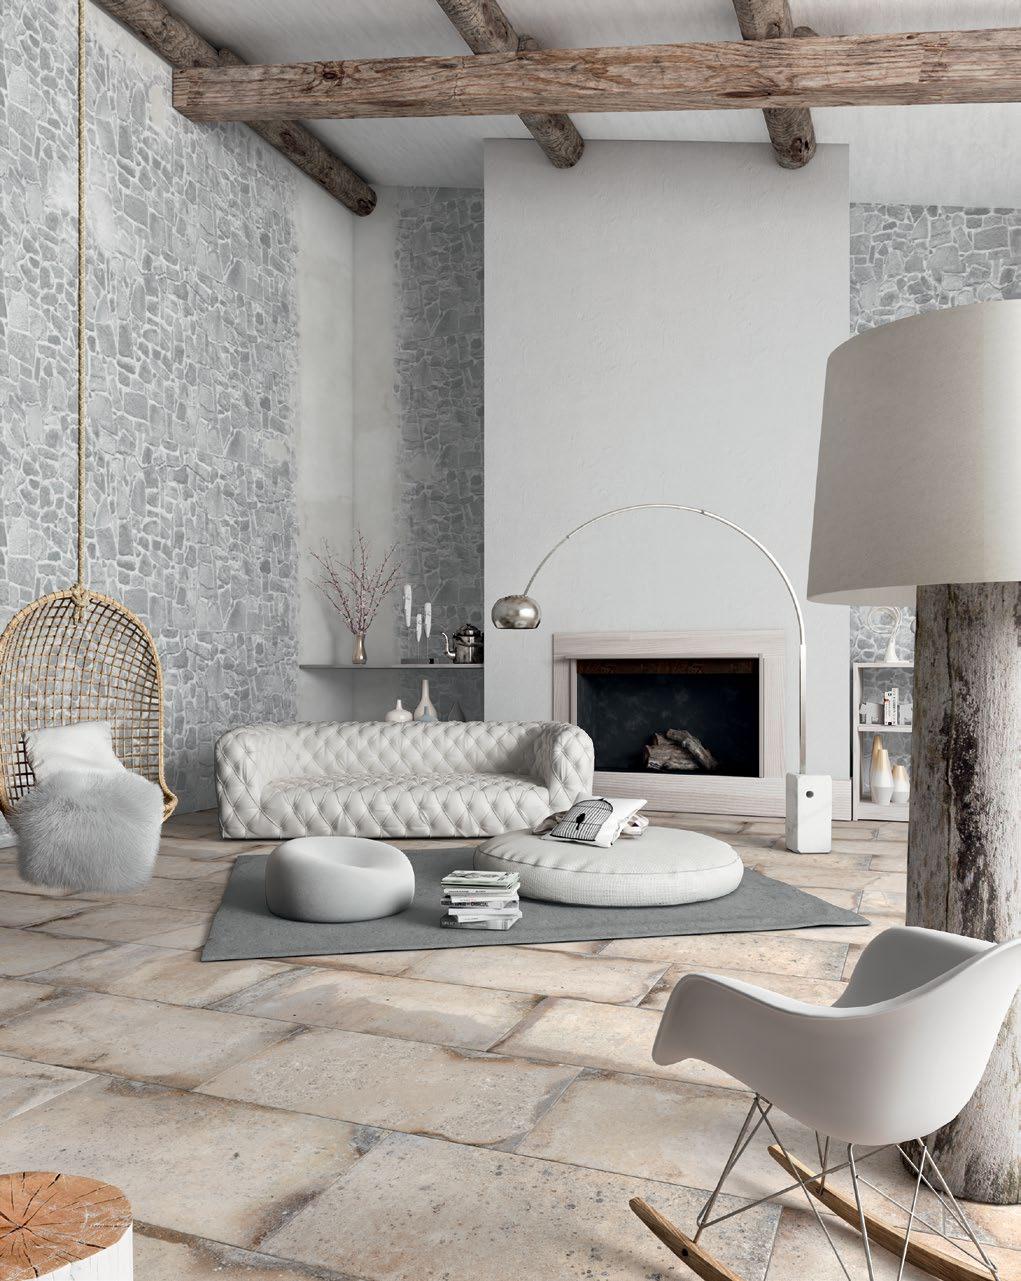 CONTEXT Context by Astor Ceramiche has a unique and timeless look that represents aged stone that